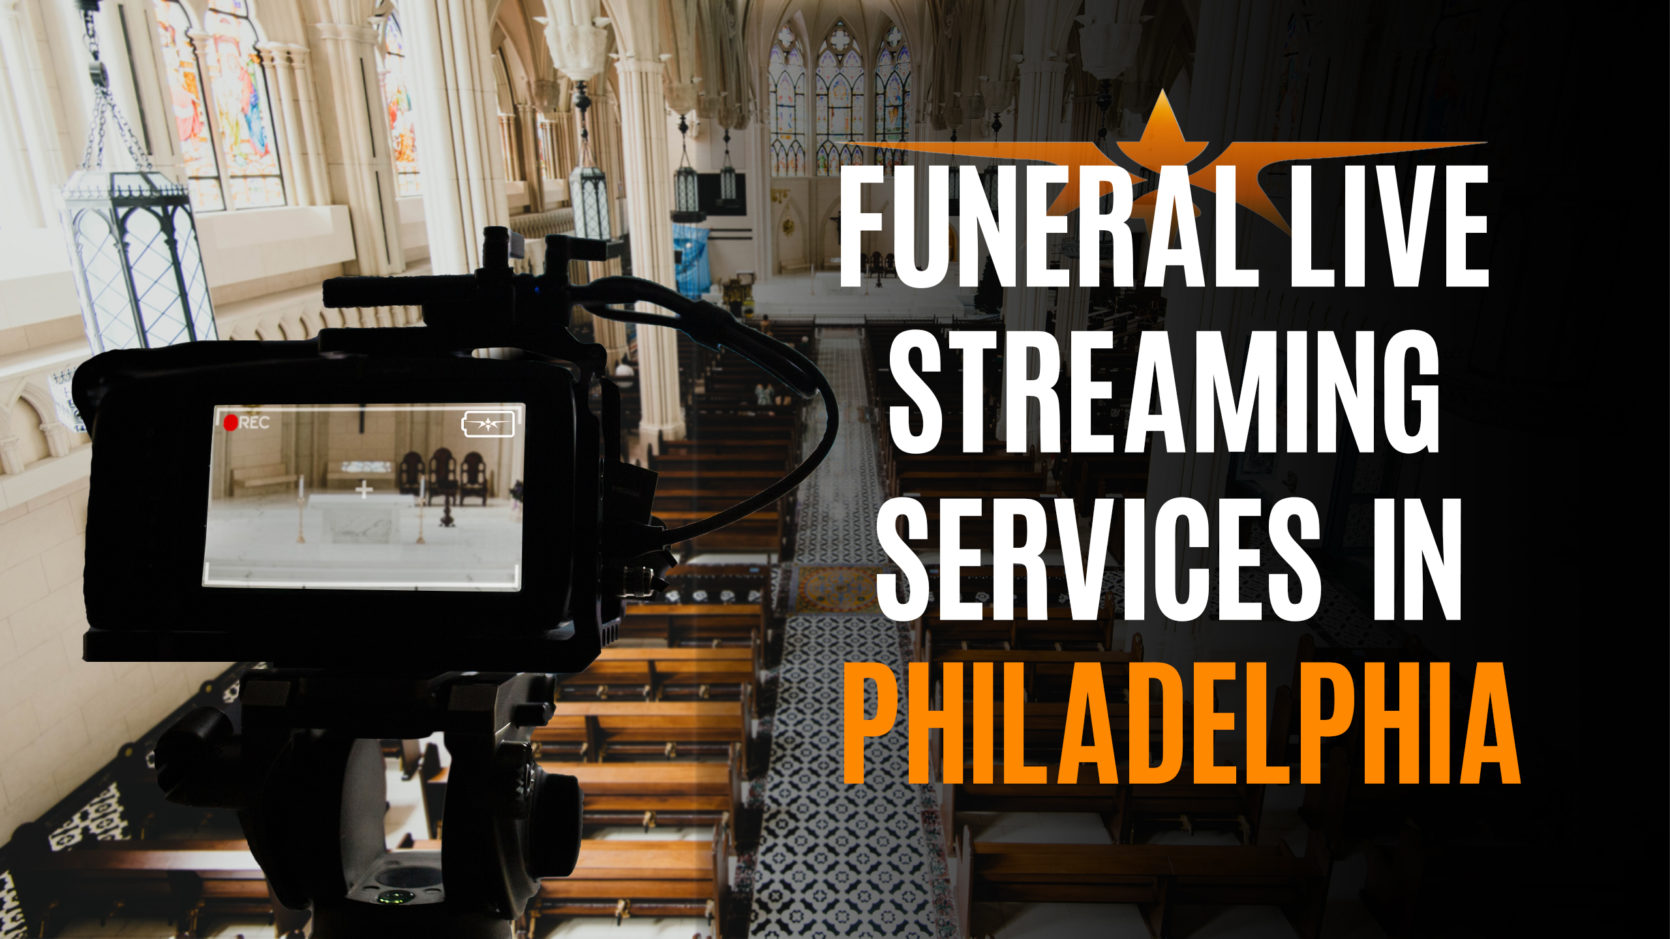 Funeral Live Streaming Services in Philadelphia